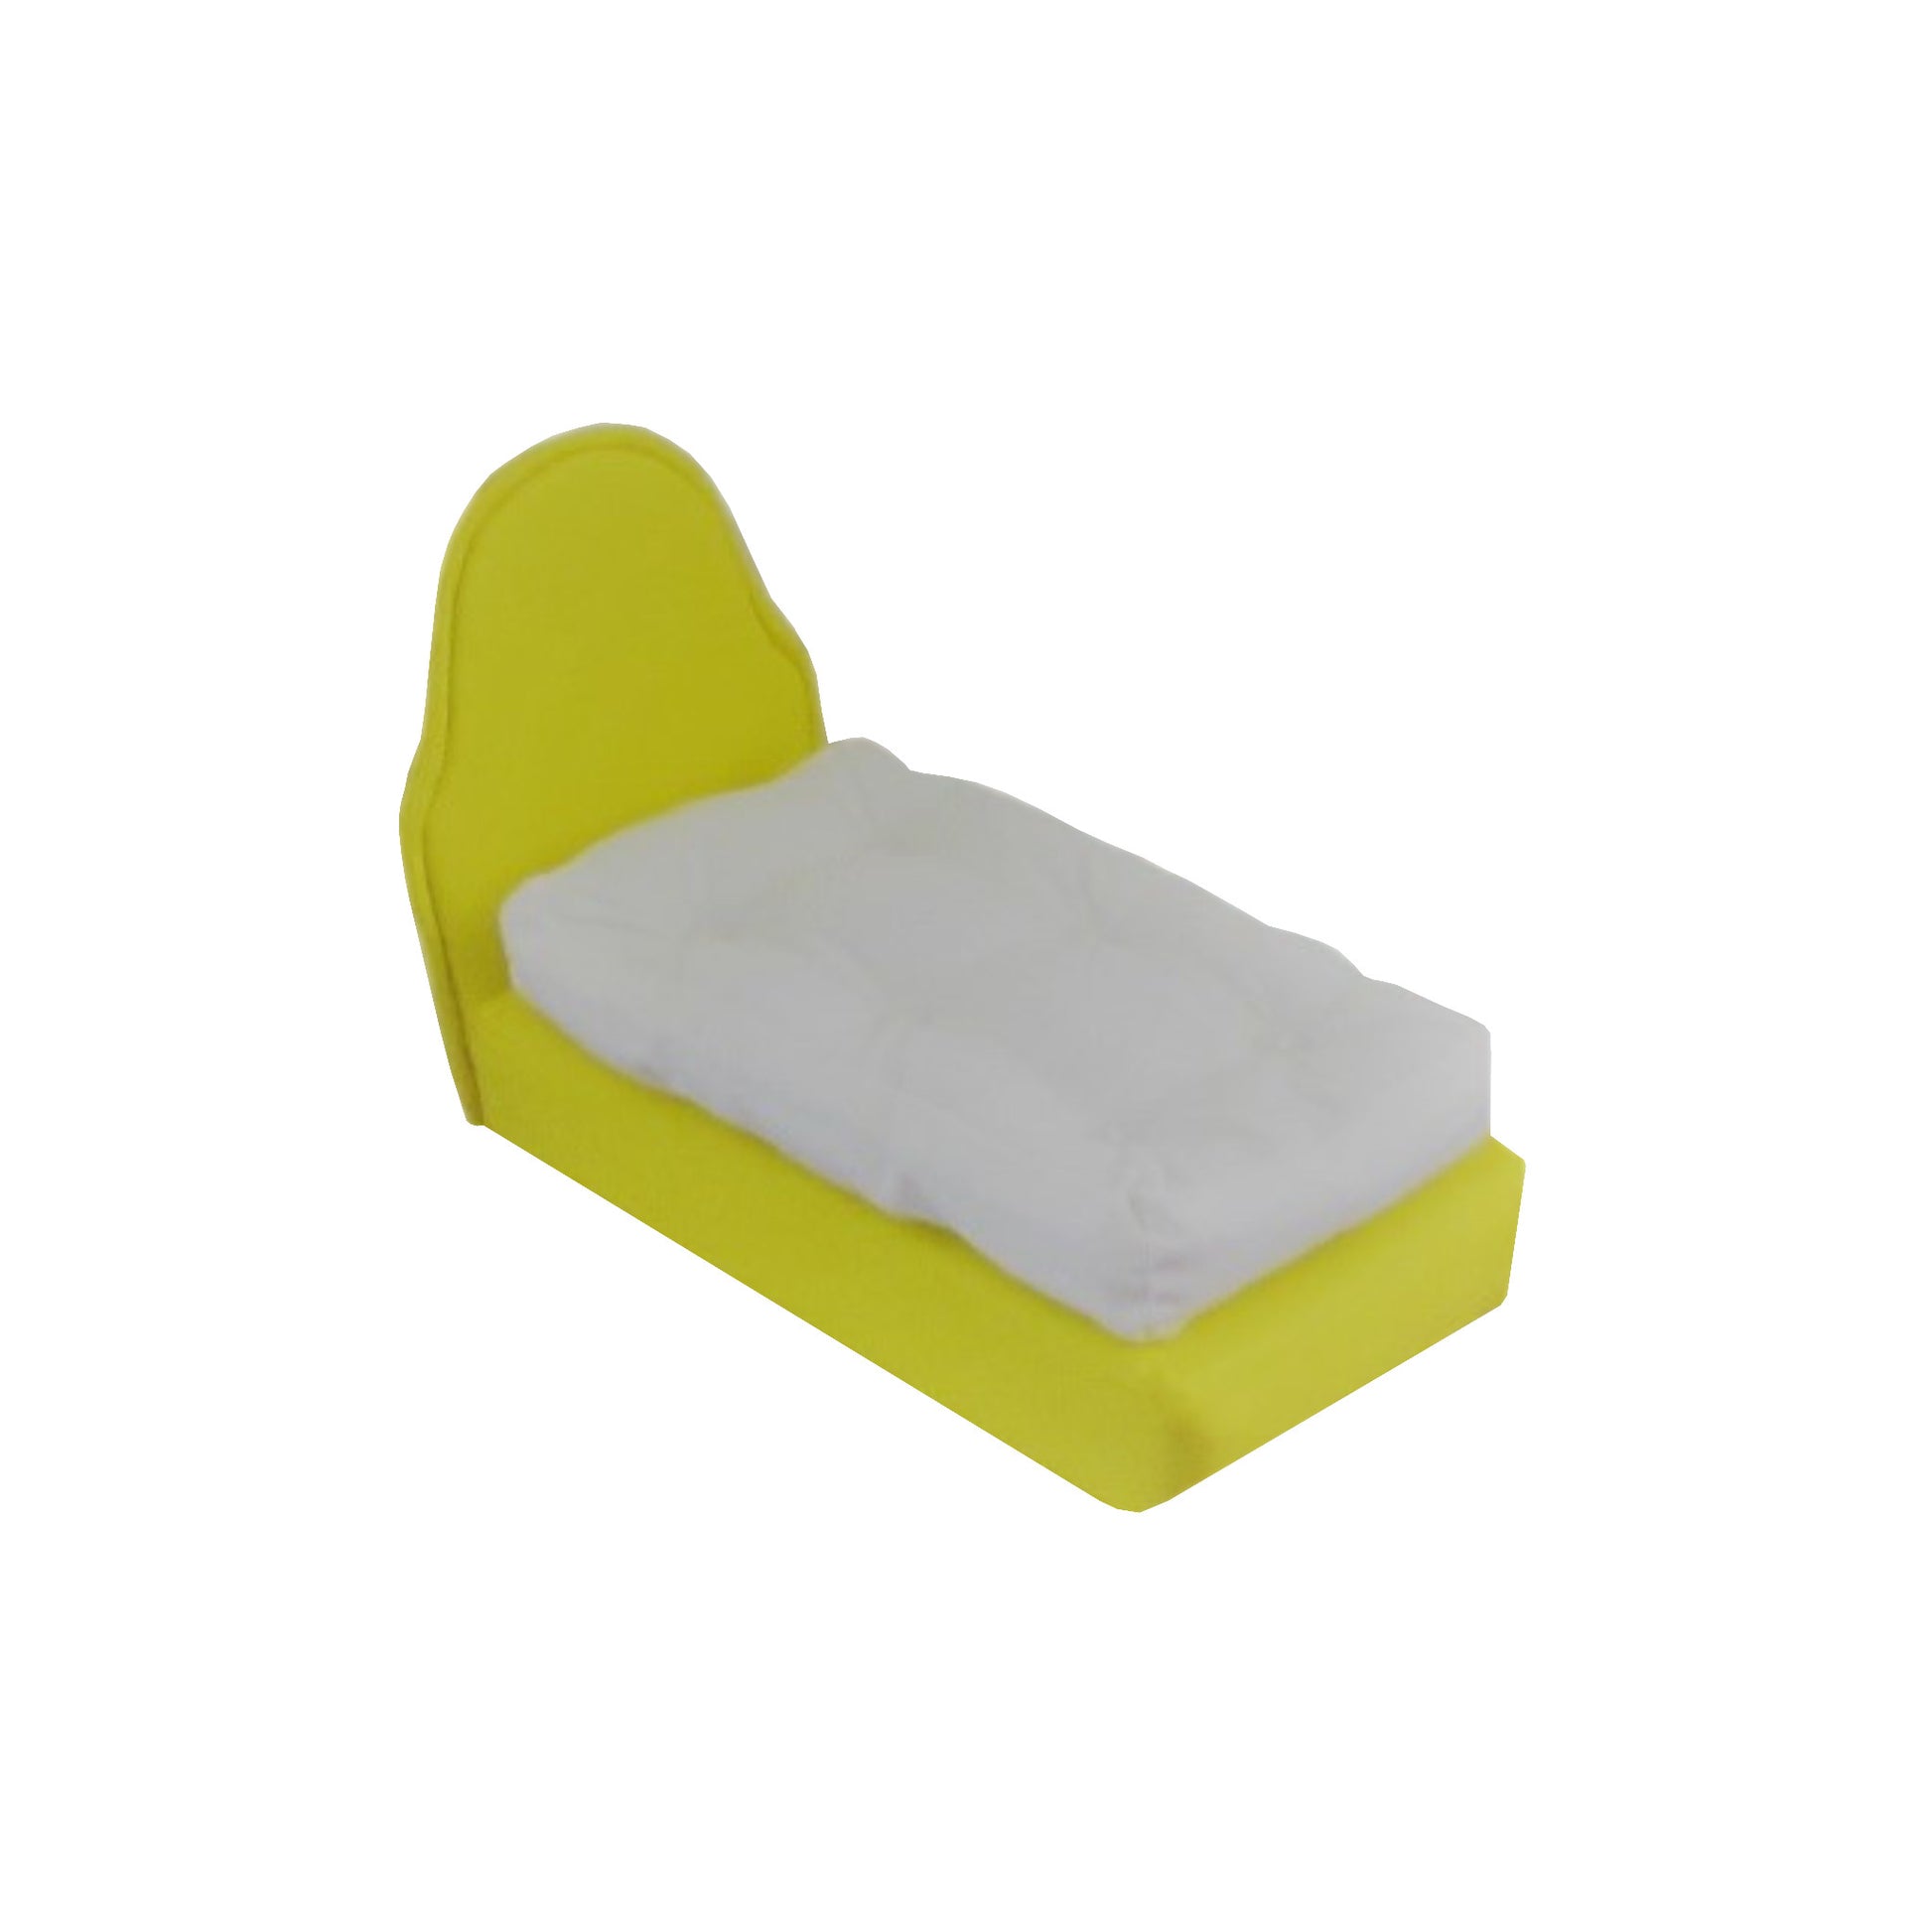 Upholstered Bright Yellow Doll Bed for 6.5-inch dolls